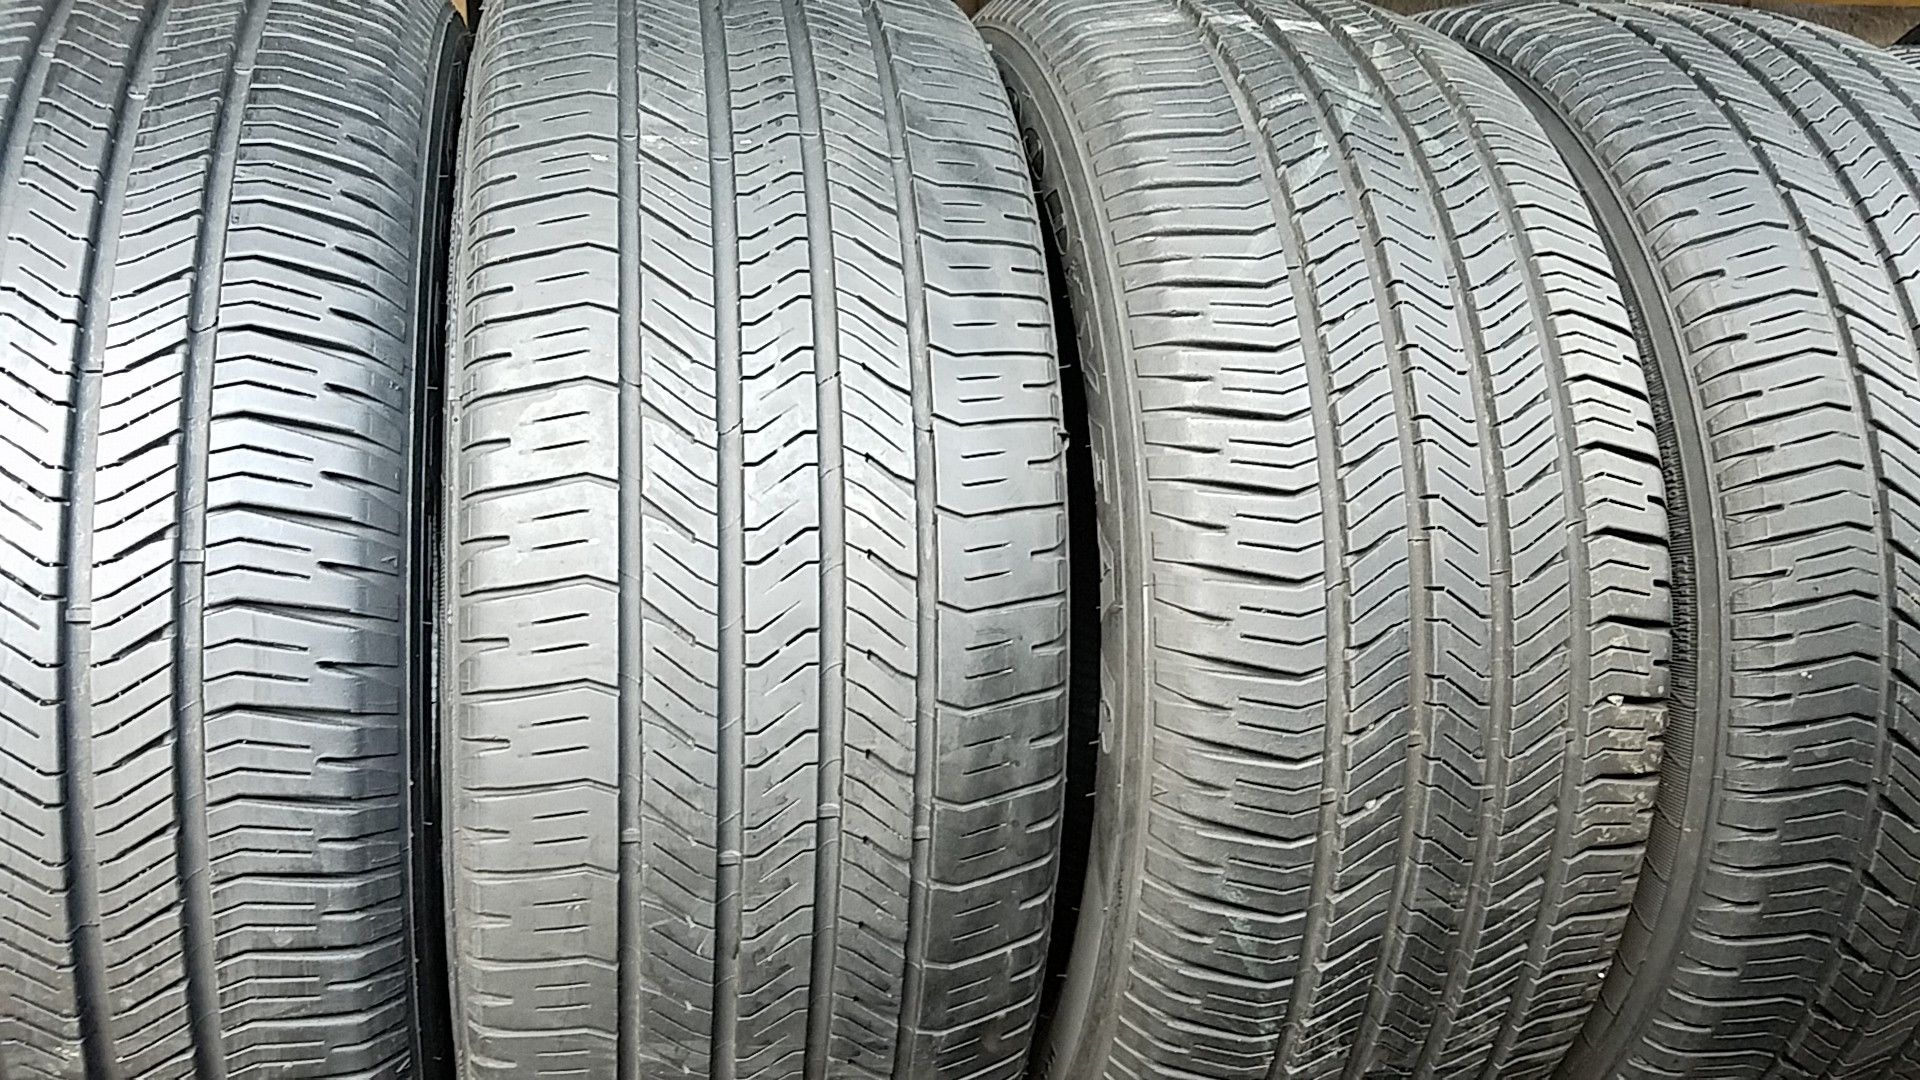 4 good set of Goodyear tires for sale 225/50/18